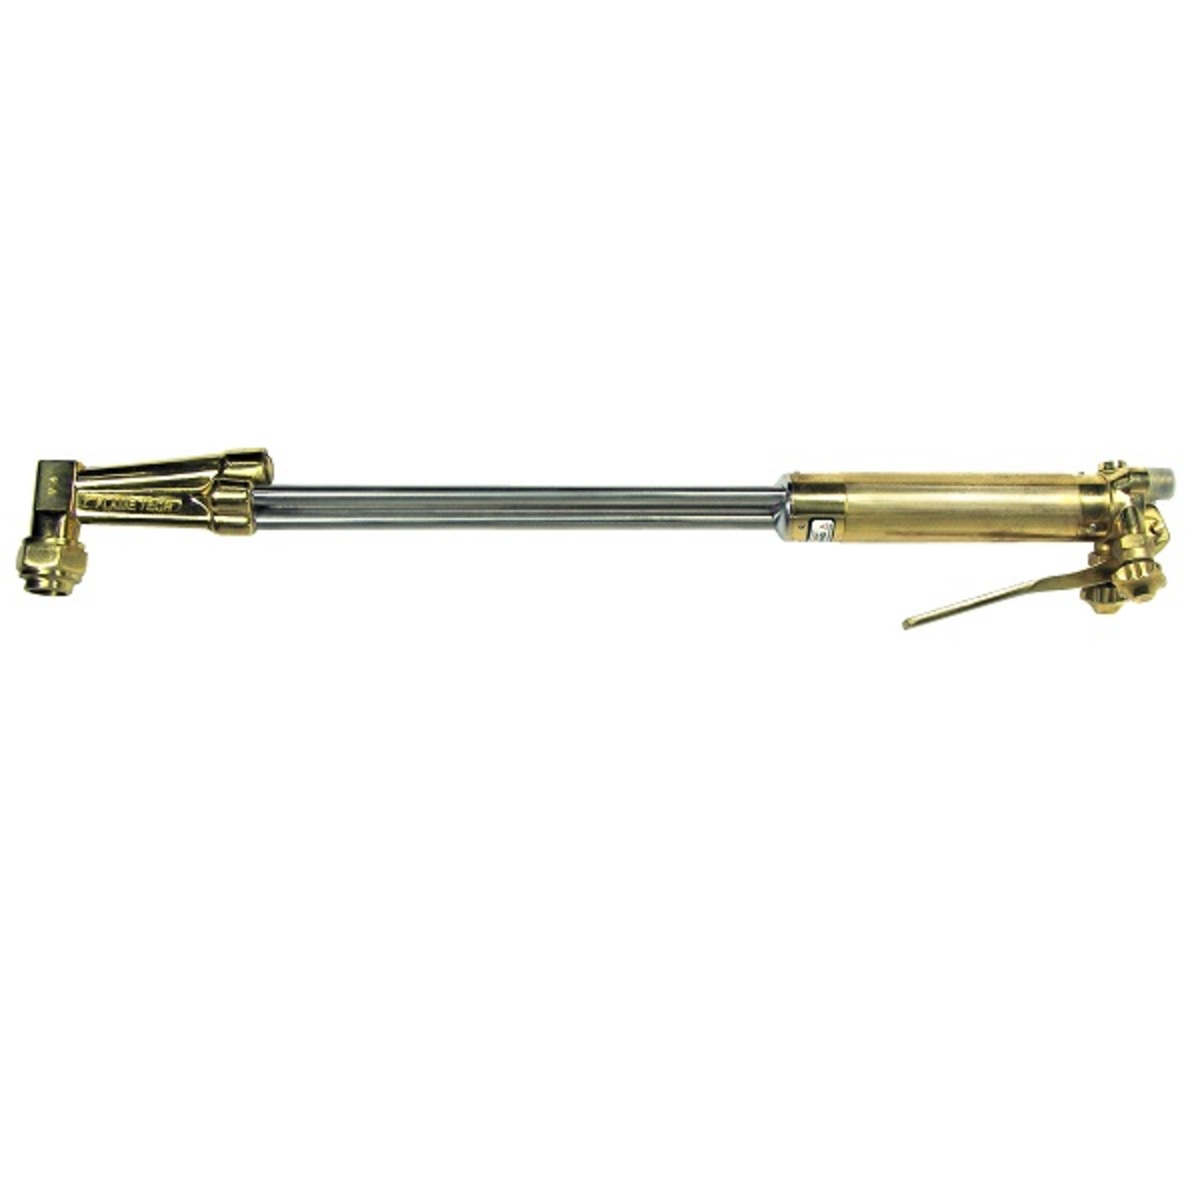 Victor Compatible Tested in The USA 21 Length FlameTech 6321-A90 Heavy Duty Hand Cutting Torch 90 Degree Head Acetylene 